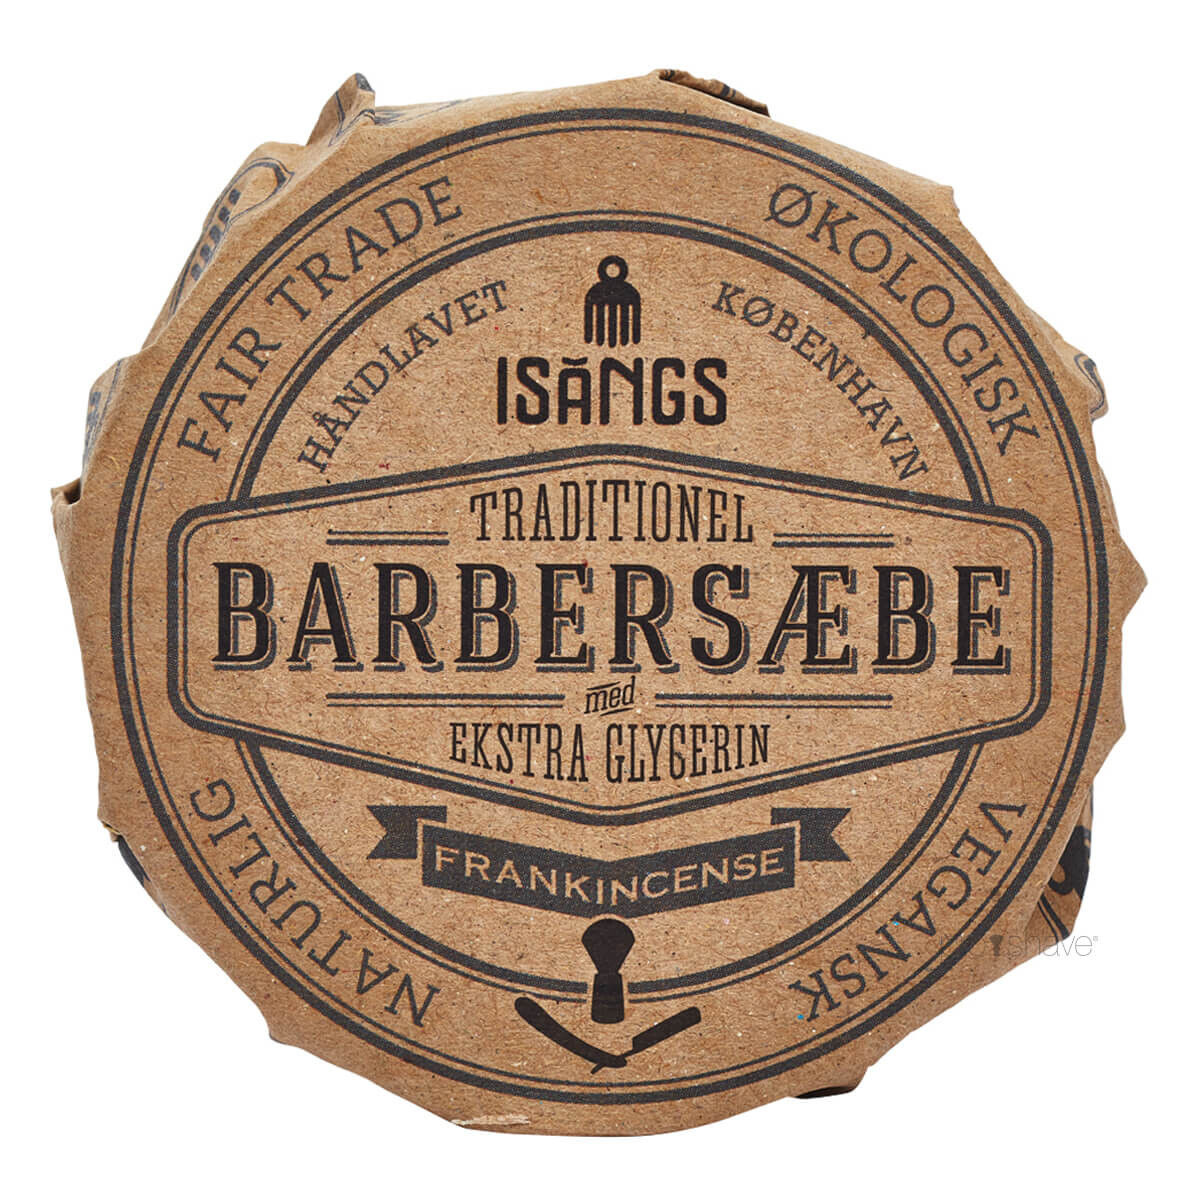 Isangs Traditionel Barbersæbe, Frankincense, 70 gr.